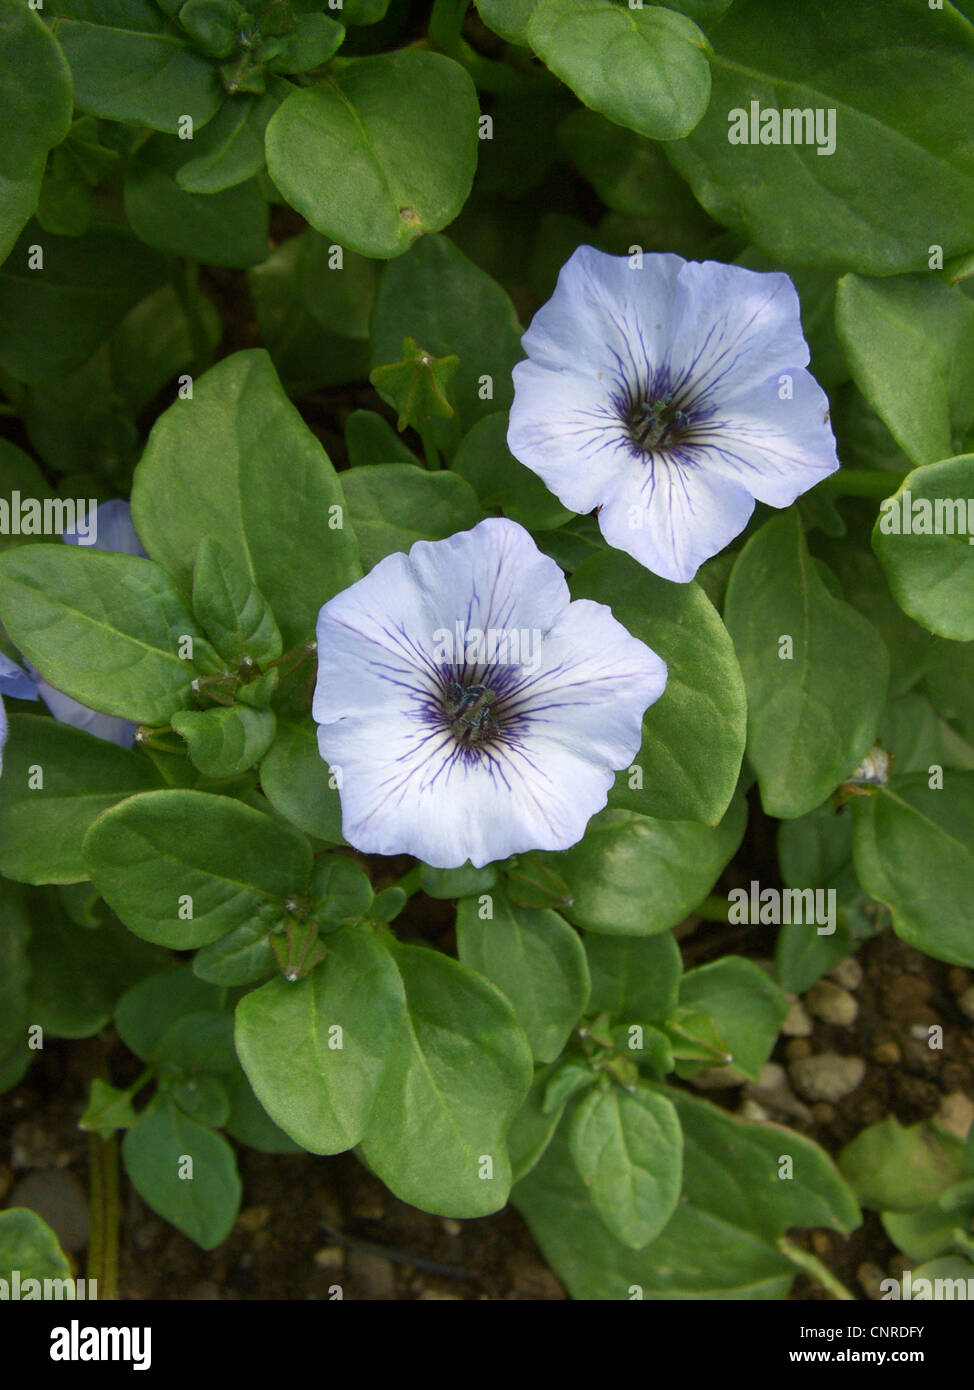 Chilean bell flower, Trailing Chilean bellflower (Nolana humifusa), blooming Stock Photo